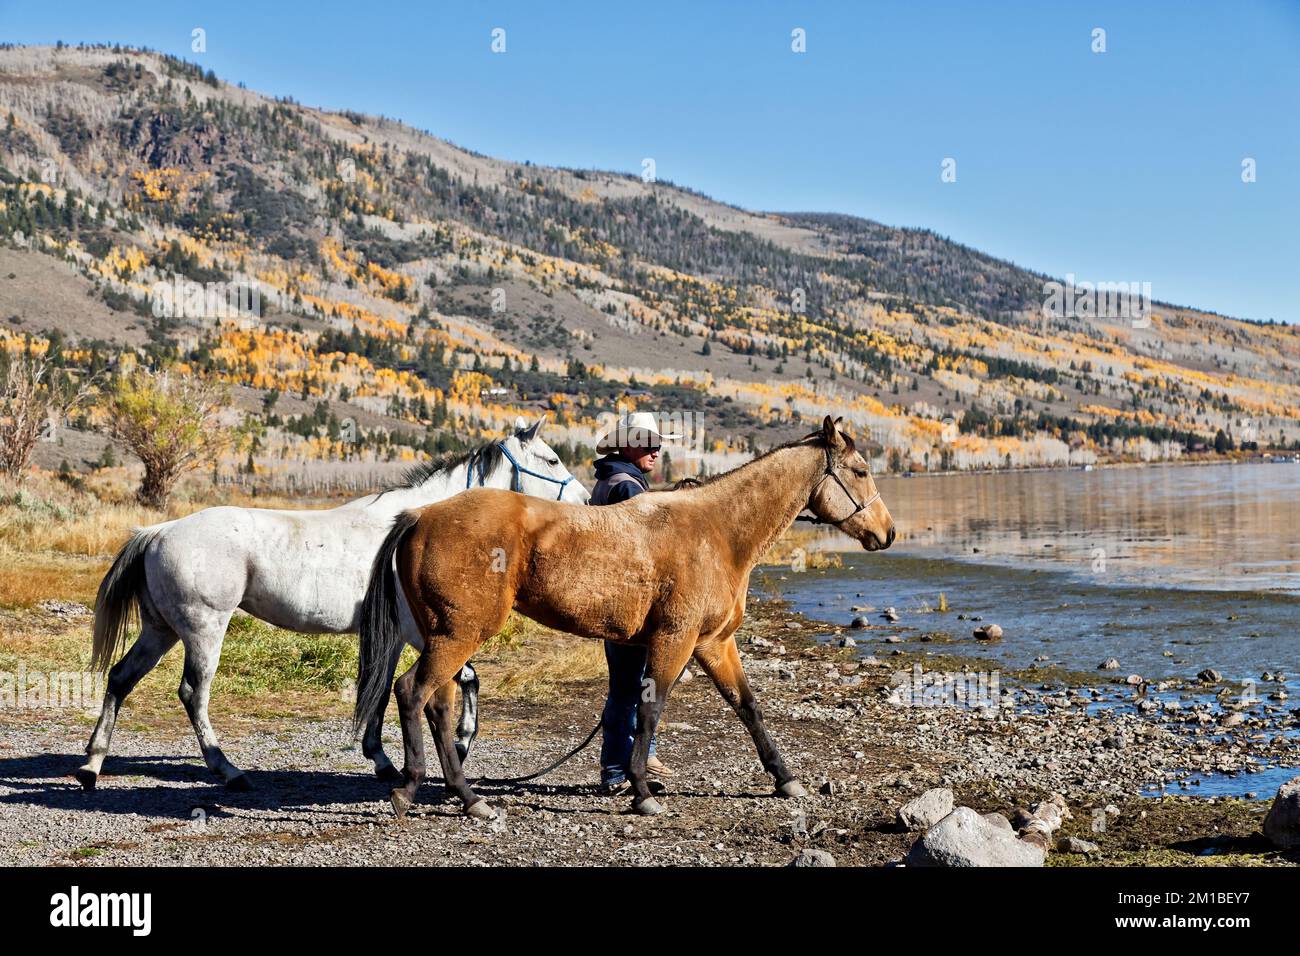 Cattle Rancher leading 'Quarter' horses to water, gathering cows from summer grazing grounds,  Fish Lake, Wasatch Mountain Range, Utah. Stock Photo